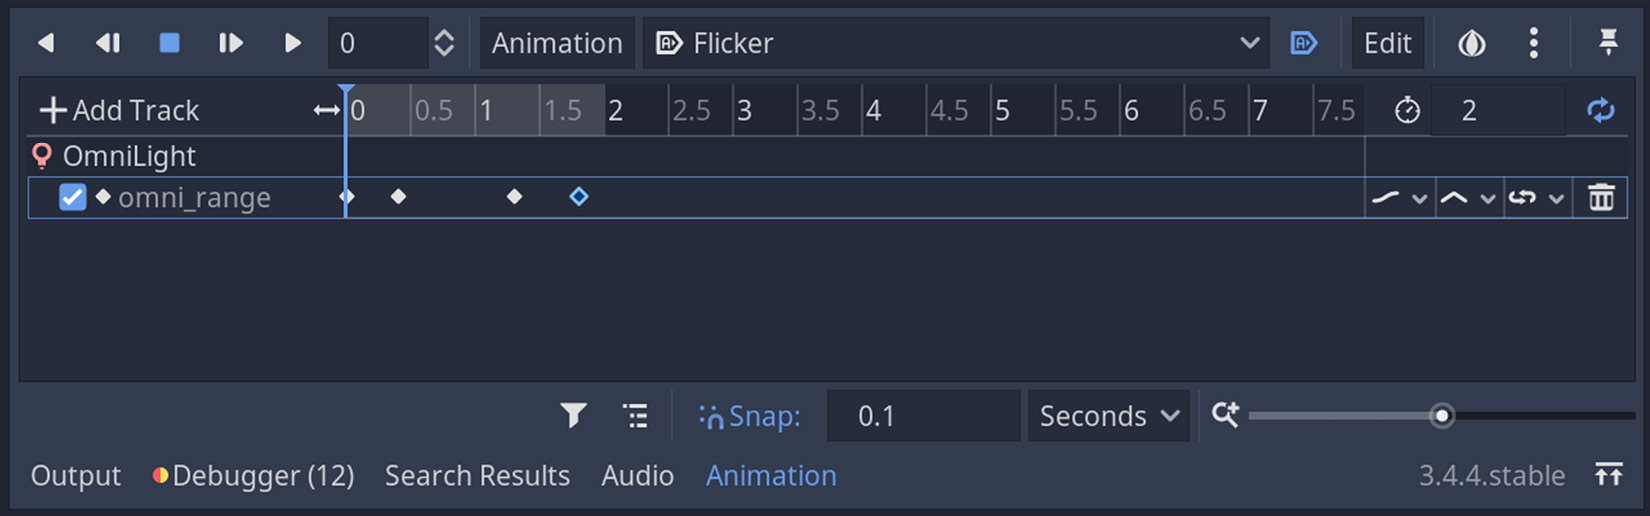 Figure 13.13 – The Flicker action has been defined for OmniLight in sconces
